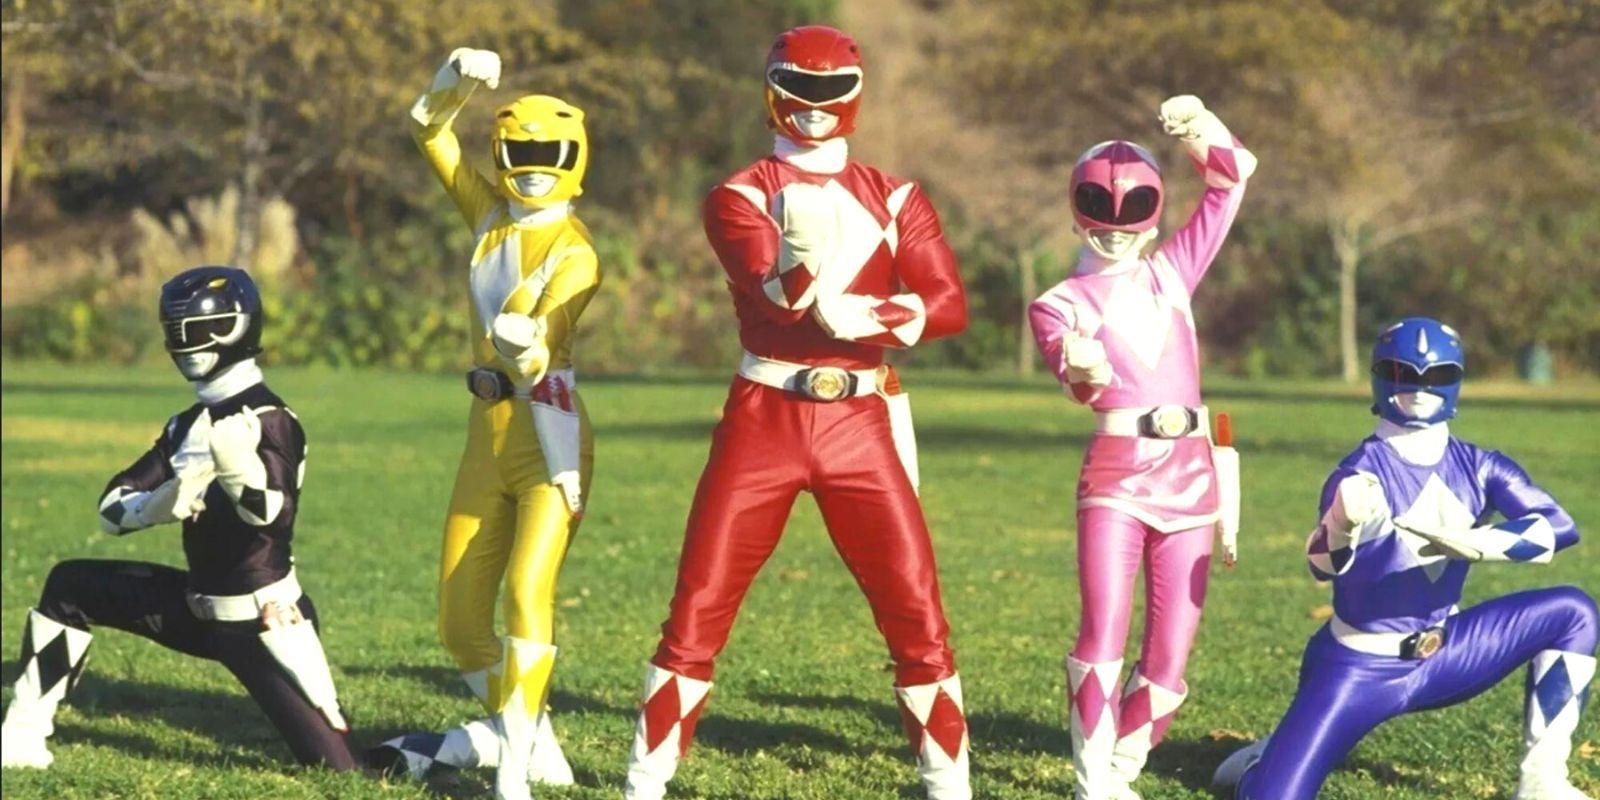 The Might Morphin' Power Rangers striking their unique battle poses